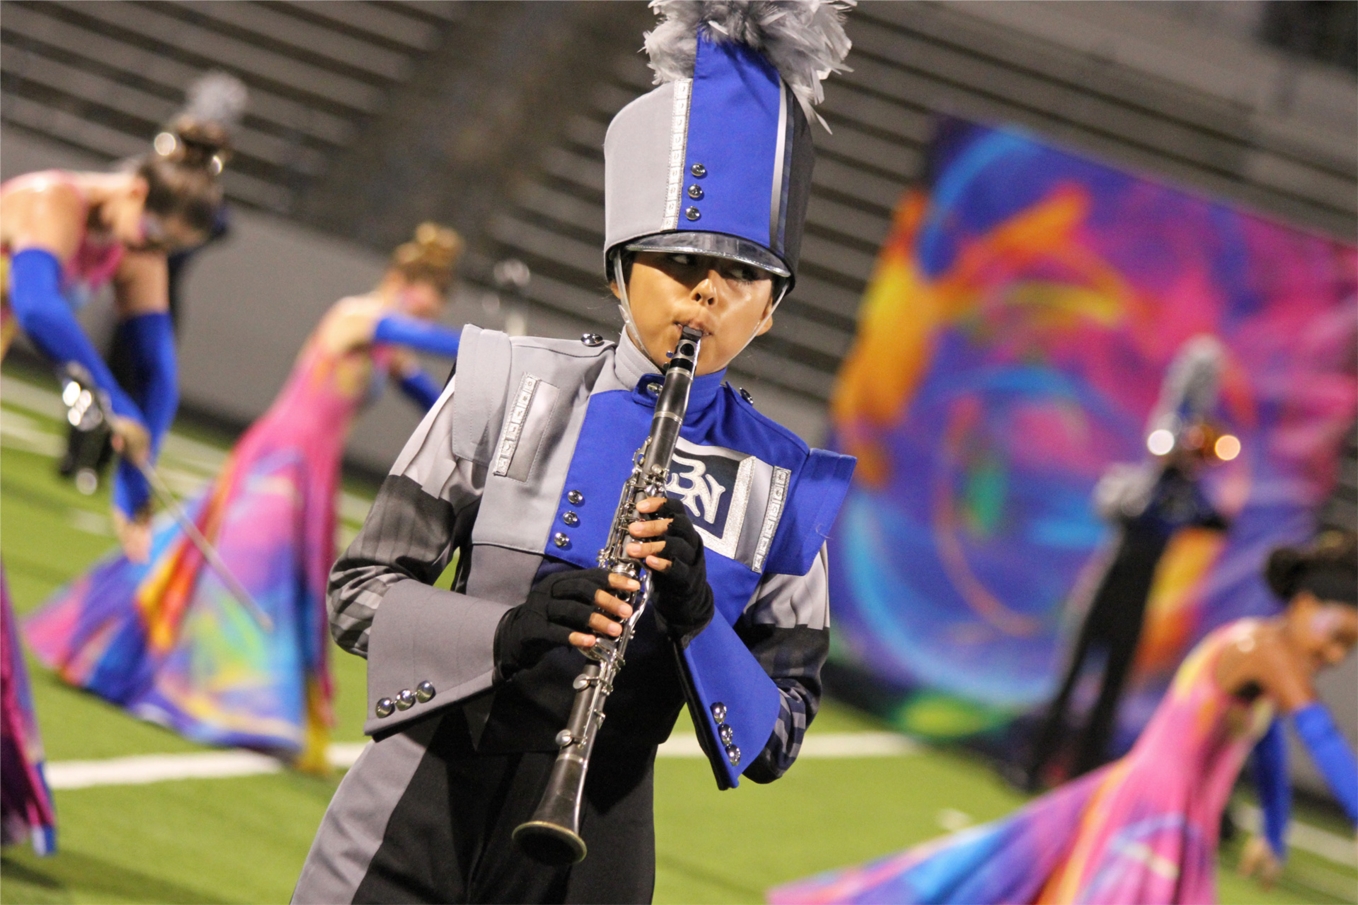 Members of the Byron Nelson High School band perform during their portion of the 2019 Northwest ISD Band Showcase. The 2019 show marked the second consecutive year all middle and high school bands from the district joined for a free showcase for friends, families and community members.